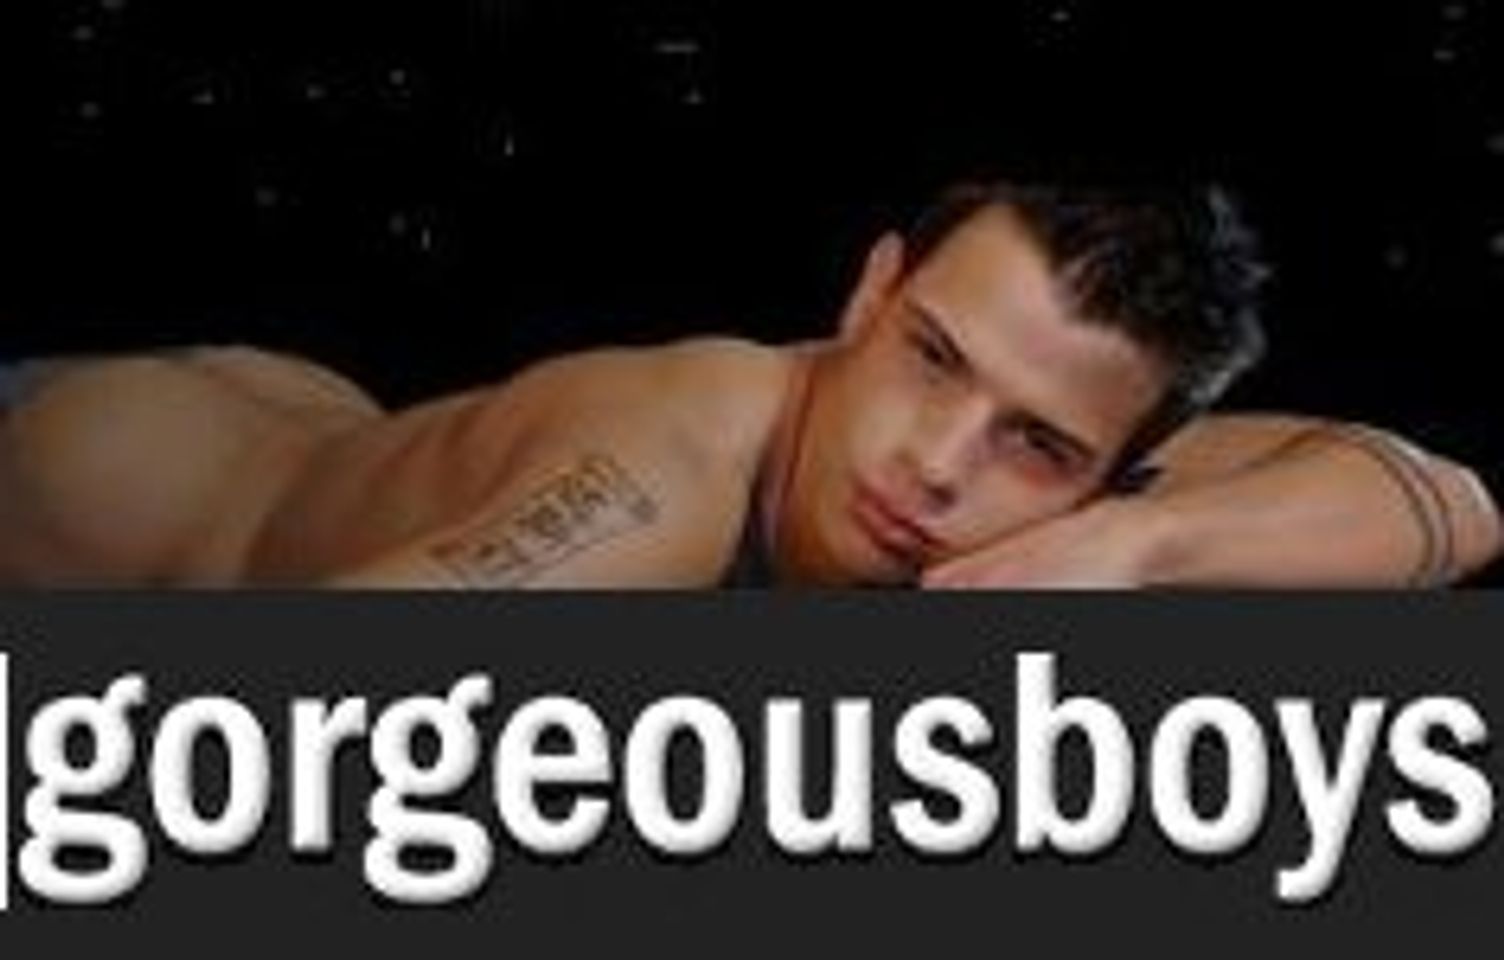 Gorgeous Boys Network Offers Performers Free Blog Publishing